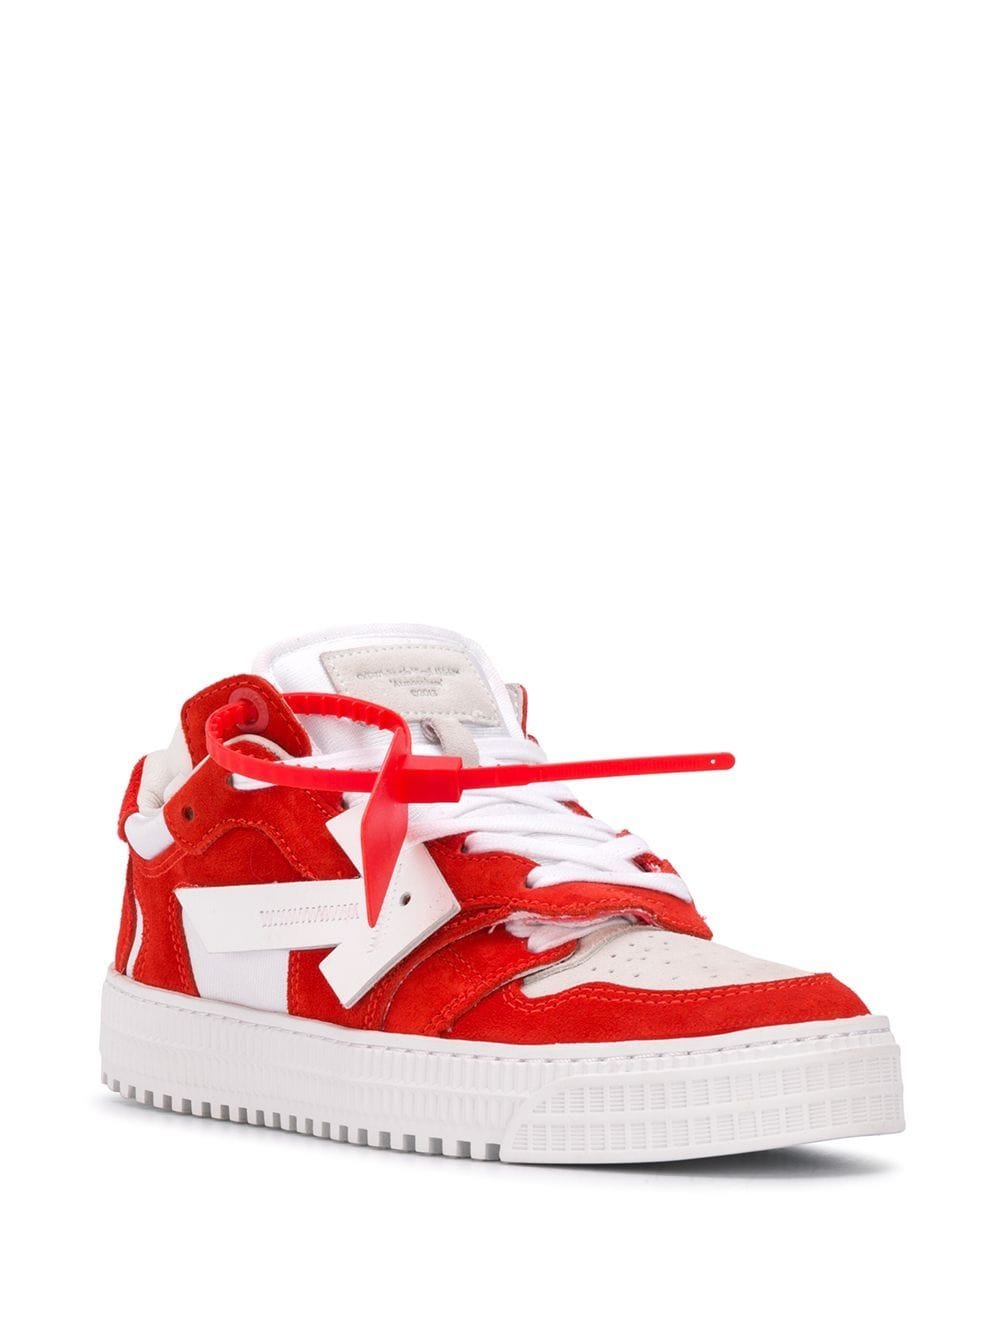 Off-White Arrow low-top sneakers - 2501 RED WHITE